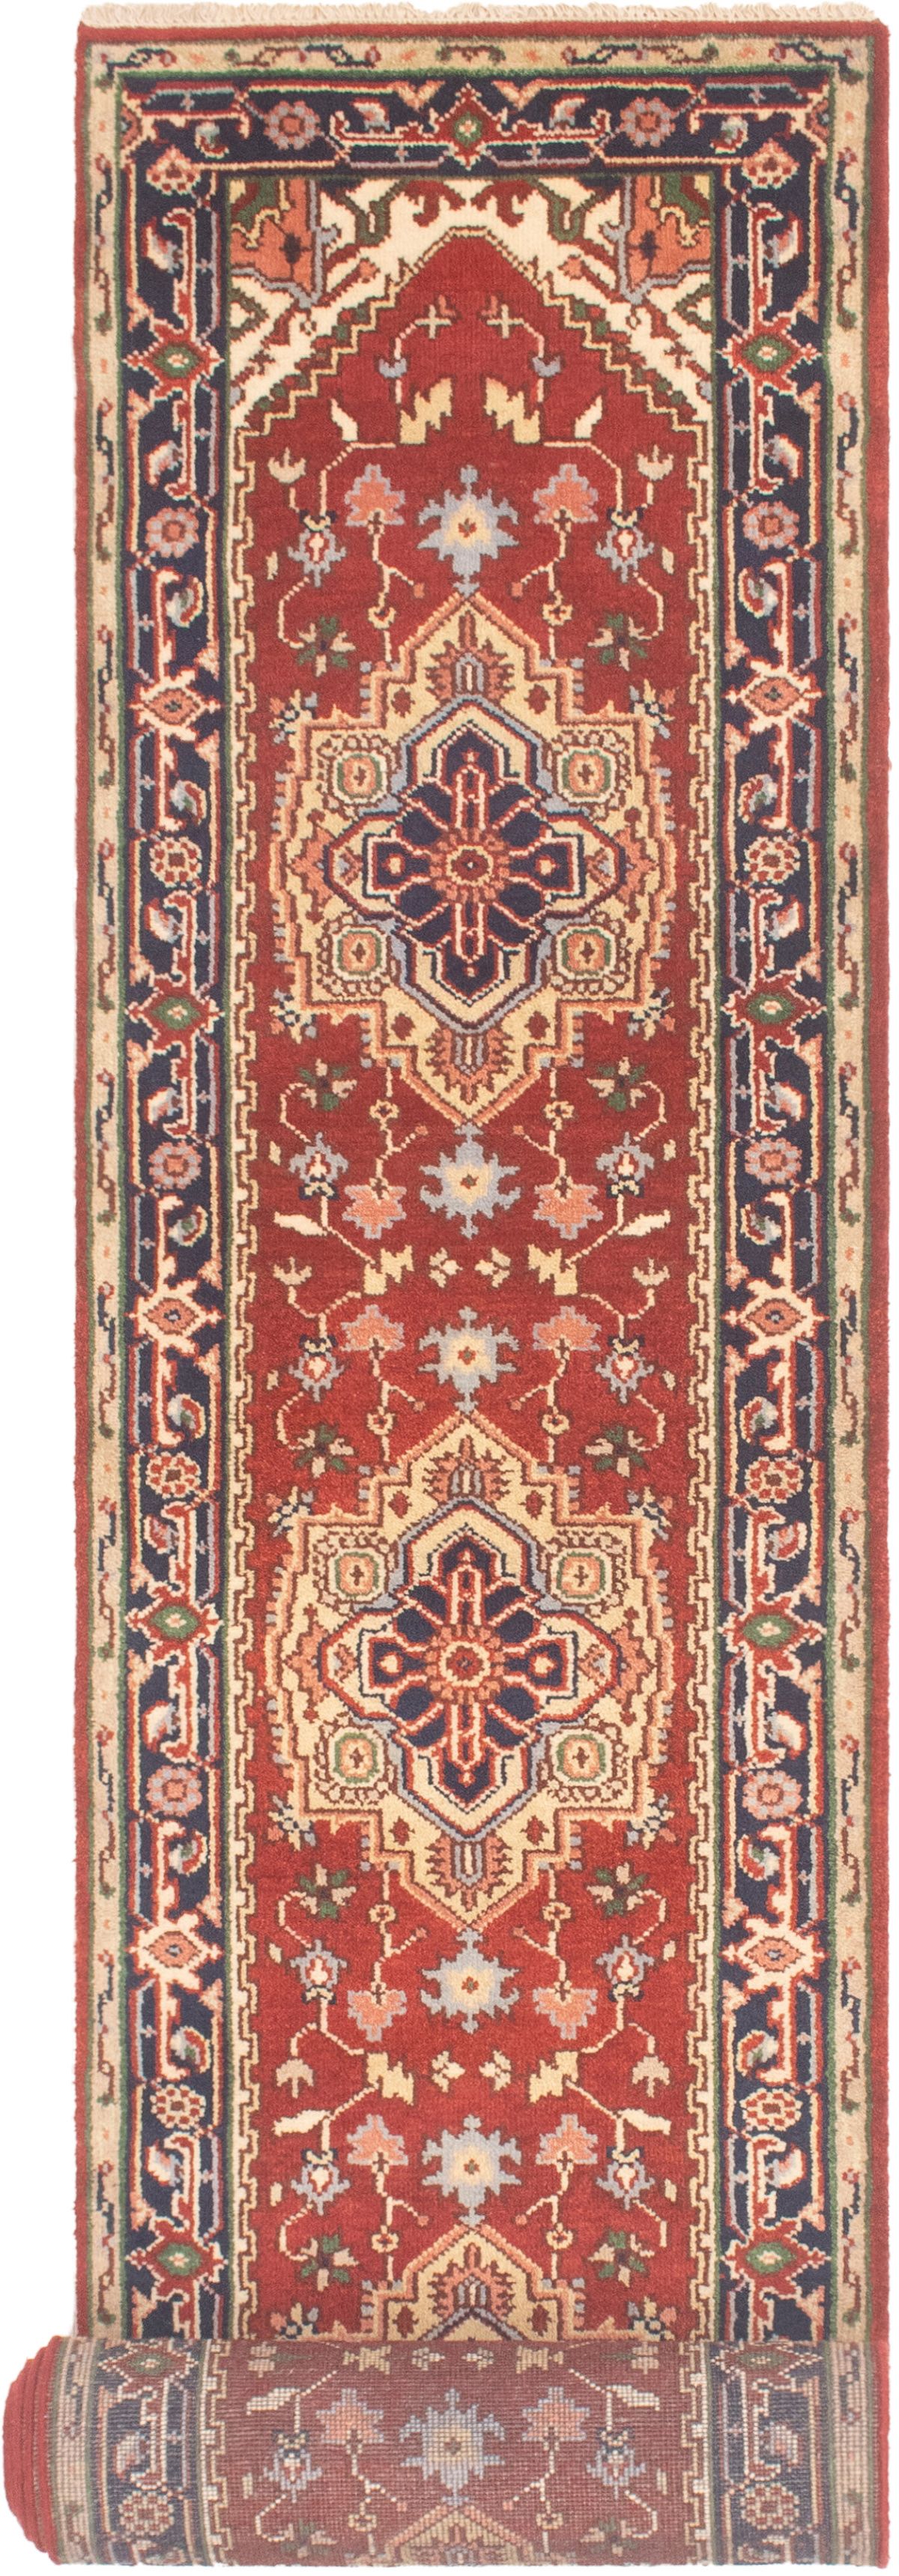 Hand-knotted Serapi Heritage Dark Copper Wool Rug 2'8" x 19'11"  Size: 2'8" x 19'11"  